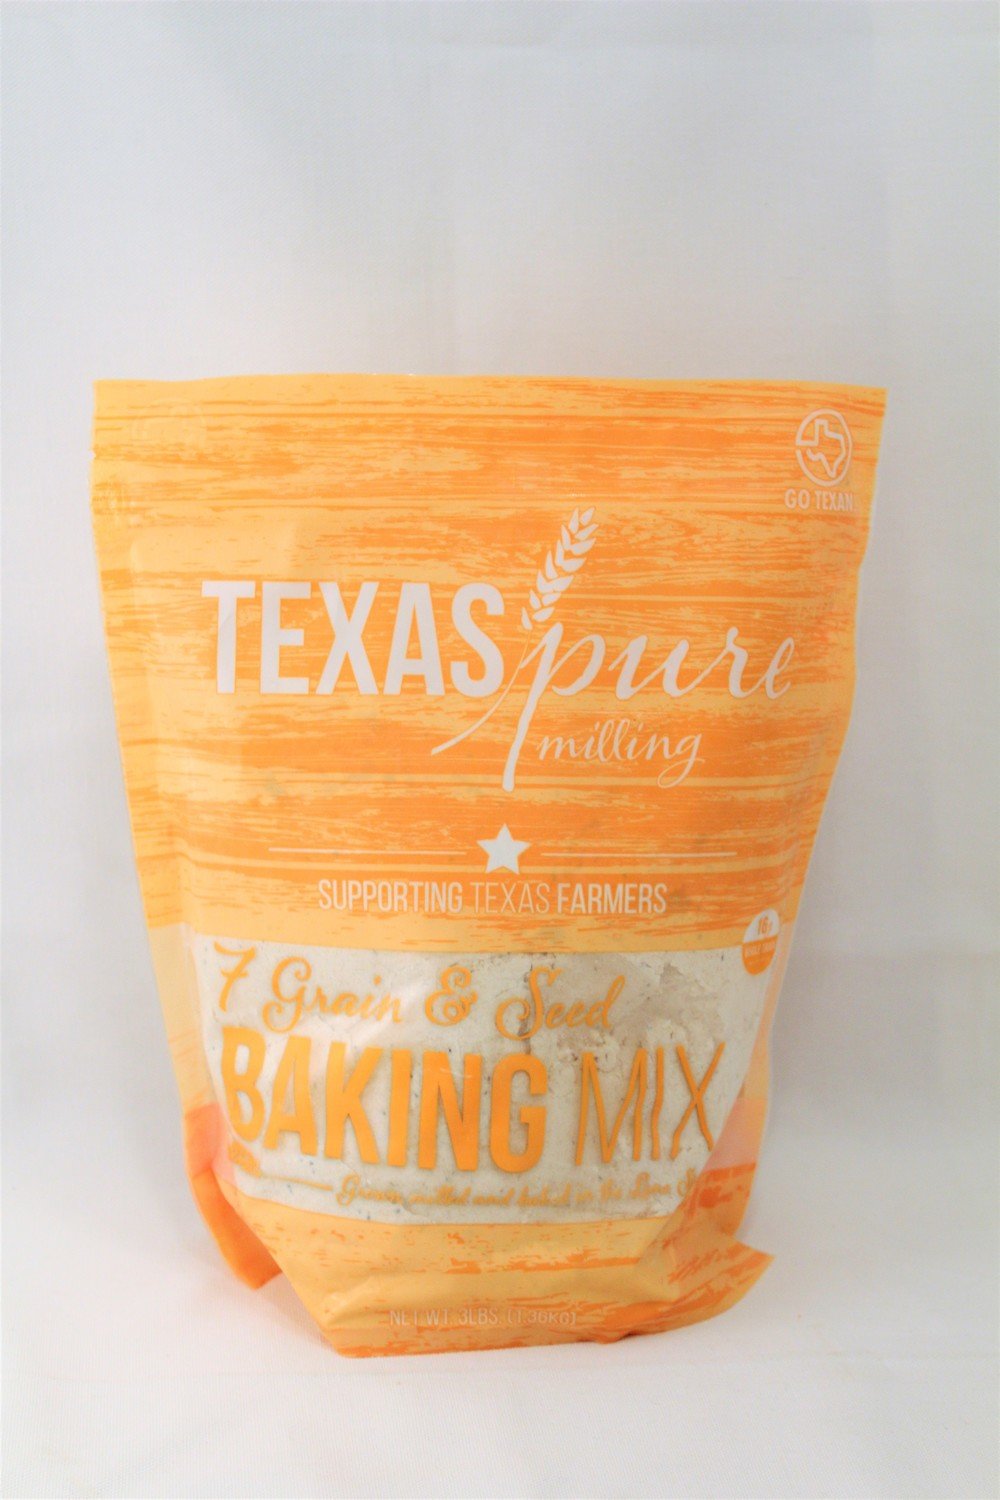 Texas Pure Milling 7 Grain & Seed Baking Mix